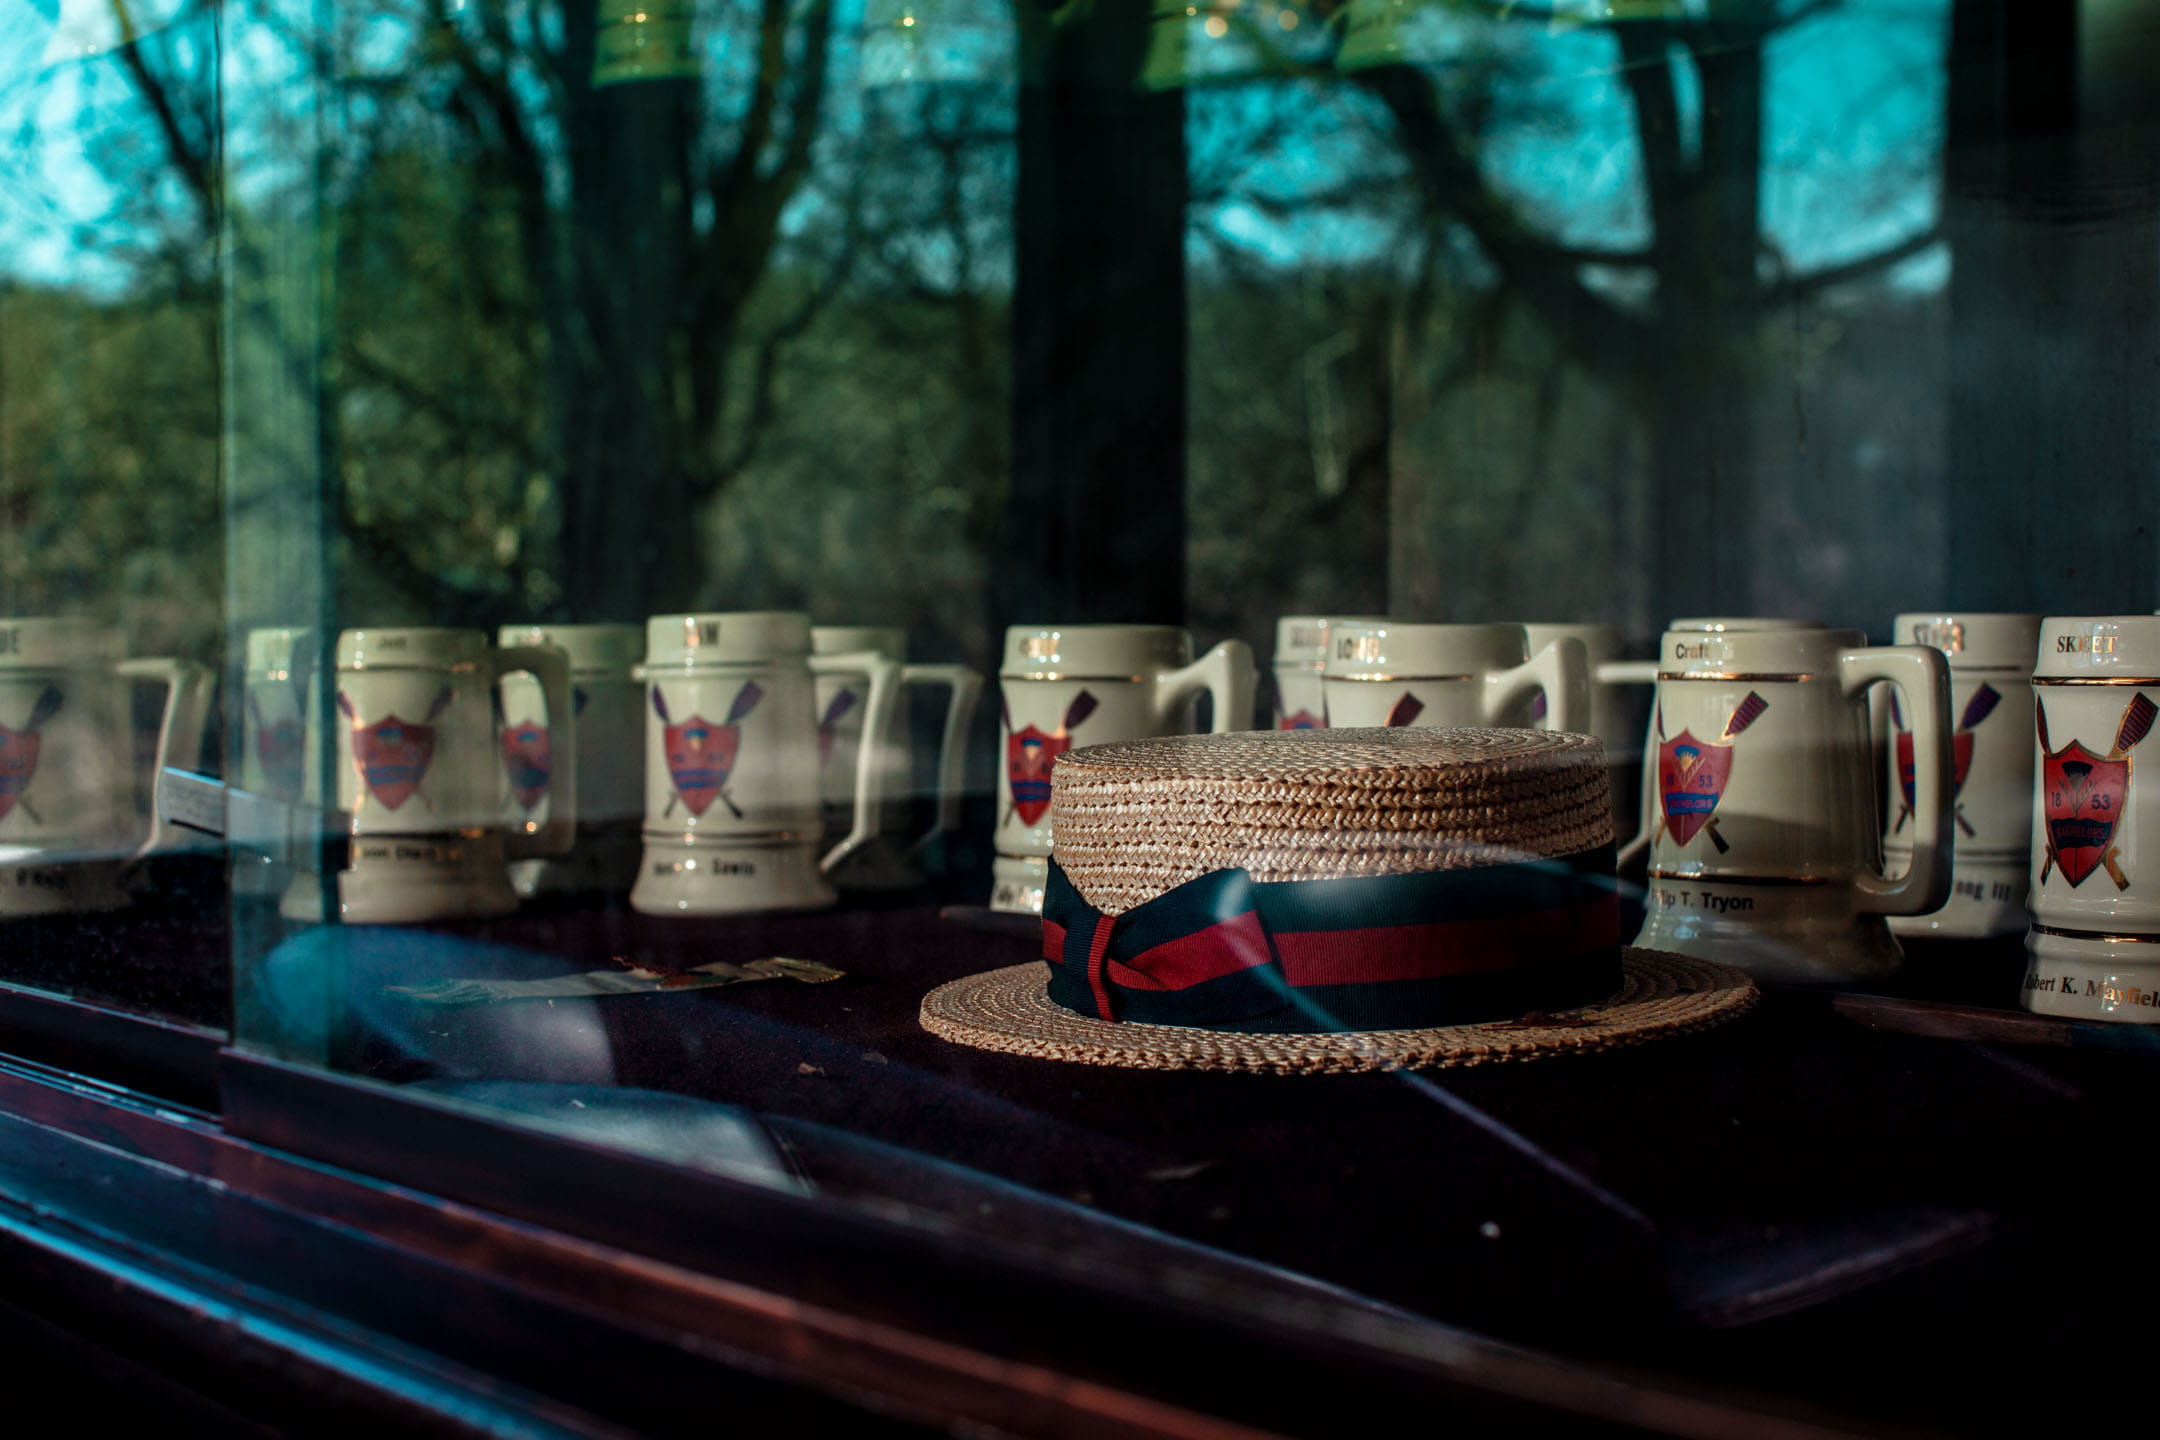 The drinking mugs of deceased Bachelors Barge Club members are displayed at the end of the porch area of the Button.